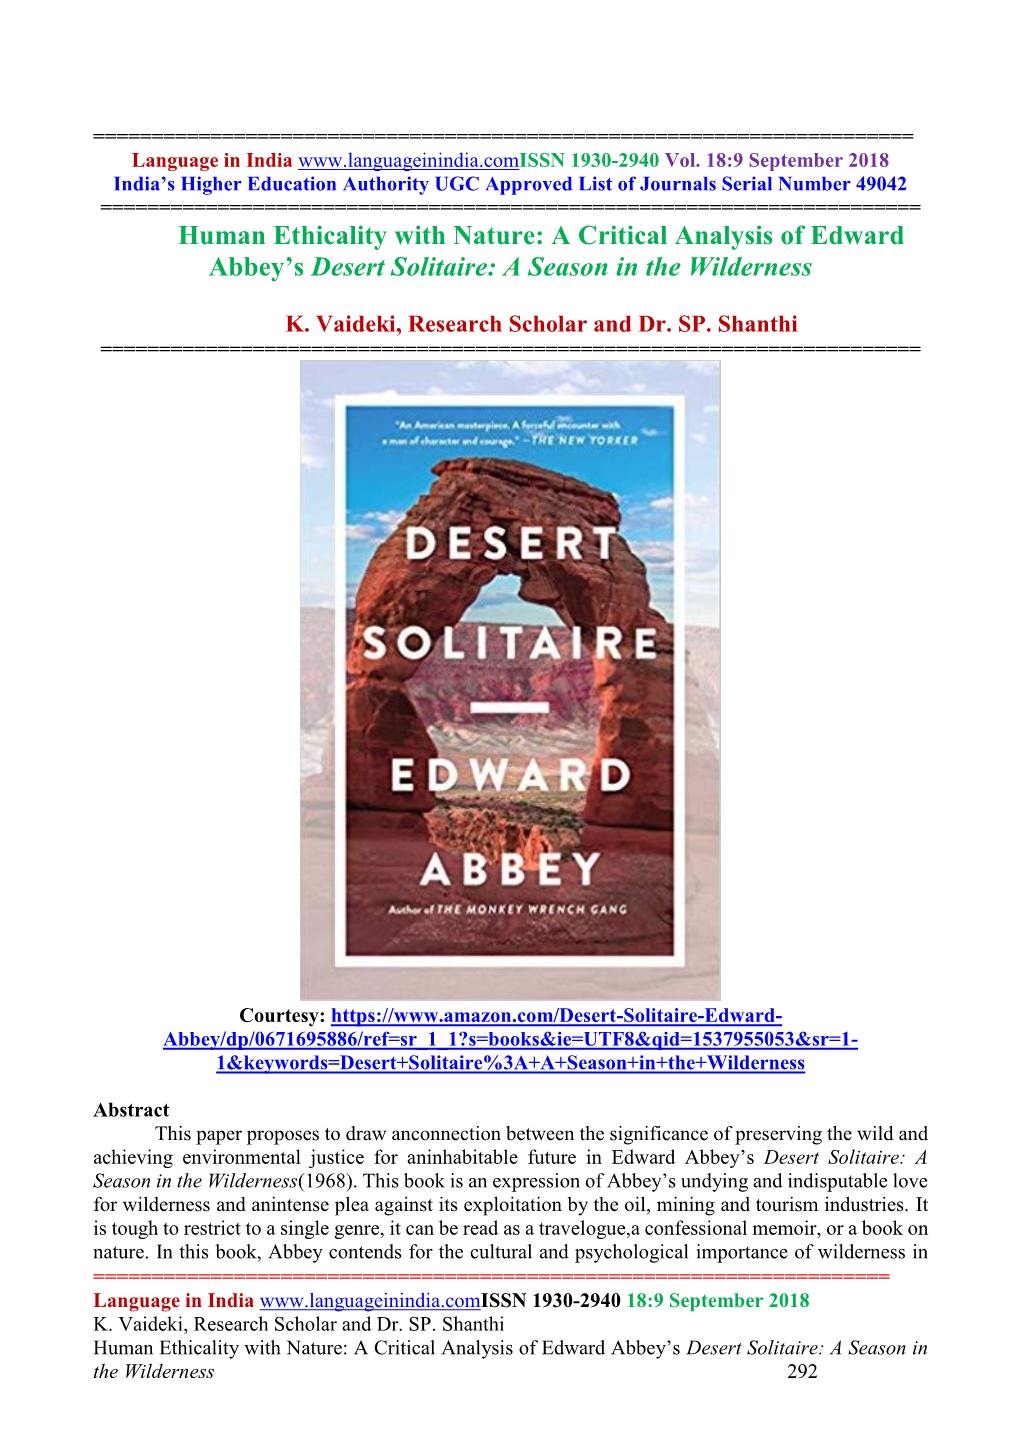 A Critical Analysis of Edward Abbey's Desert Solitaire